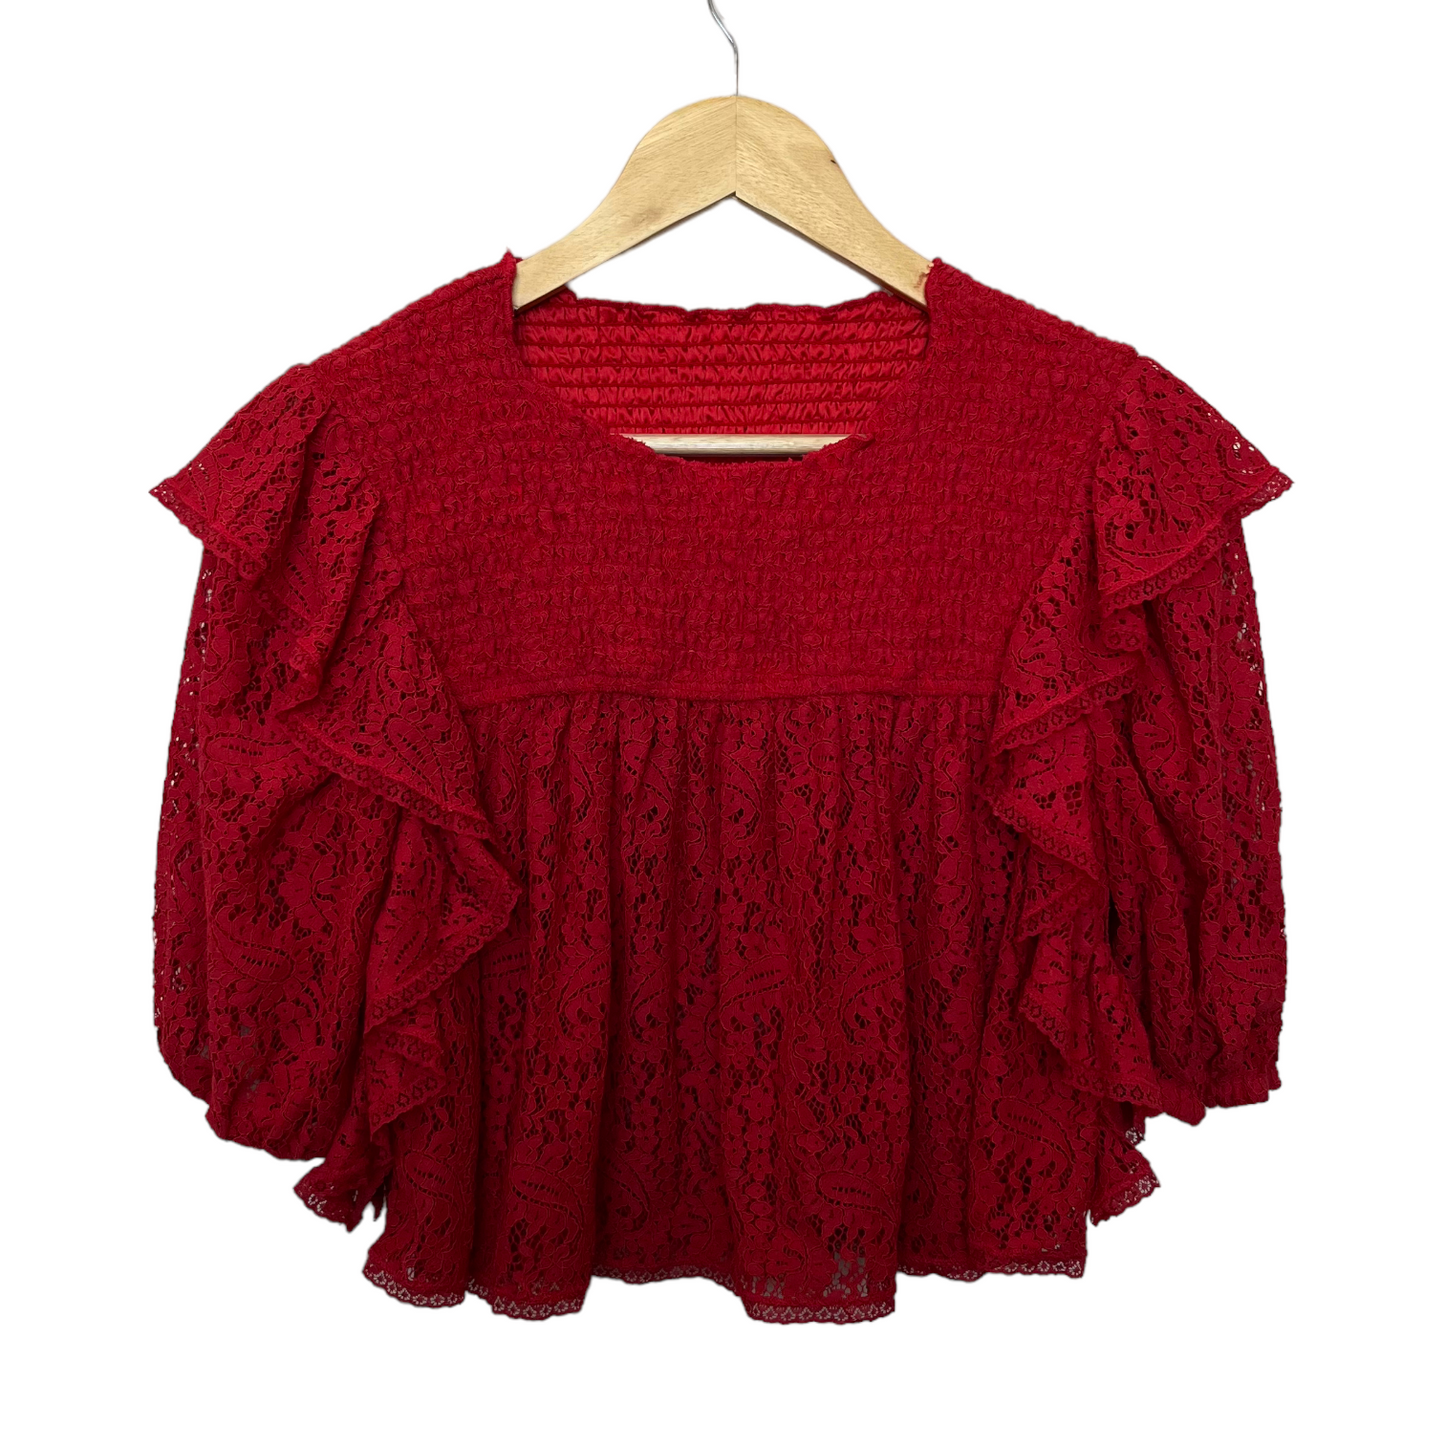 Tularosa Ashley Lace Top in Cherry Red